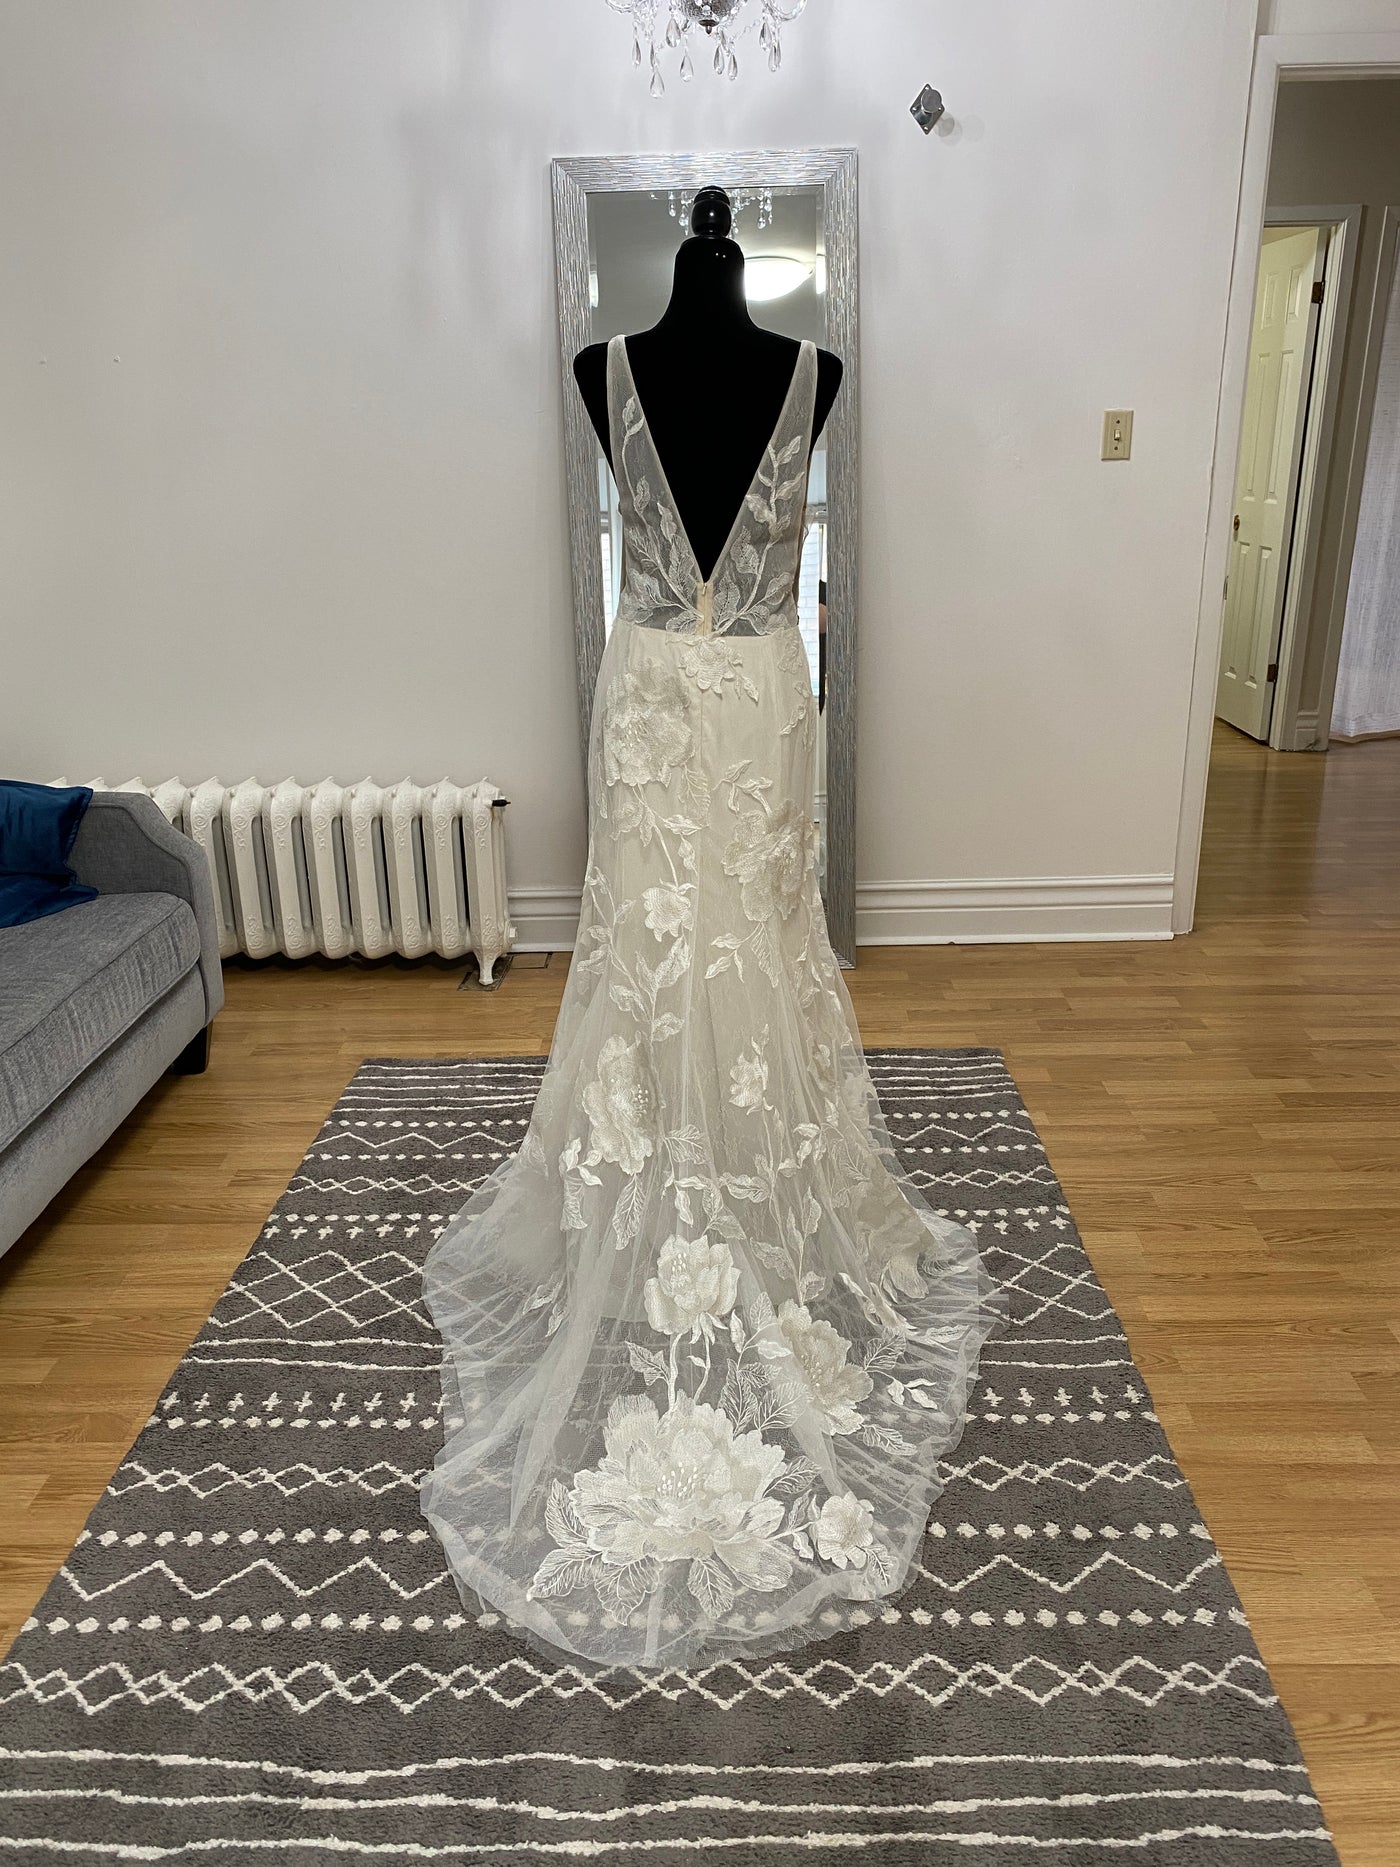 A Willowby by Watter Honor 52122 - Sample Size wedding dress with floral motifs displayed on a mannequin in a living room, reflecting in a full-length mirror.